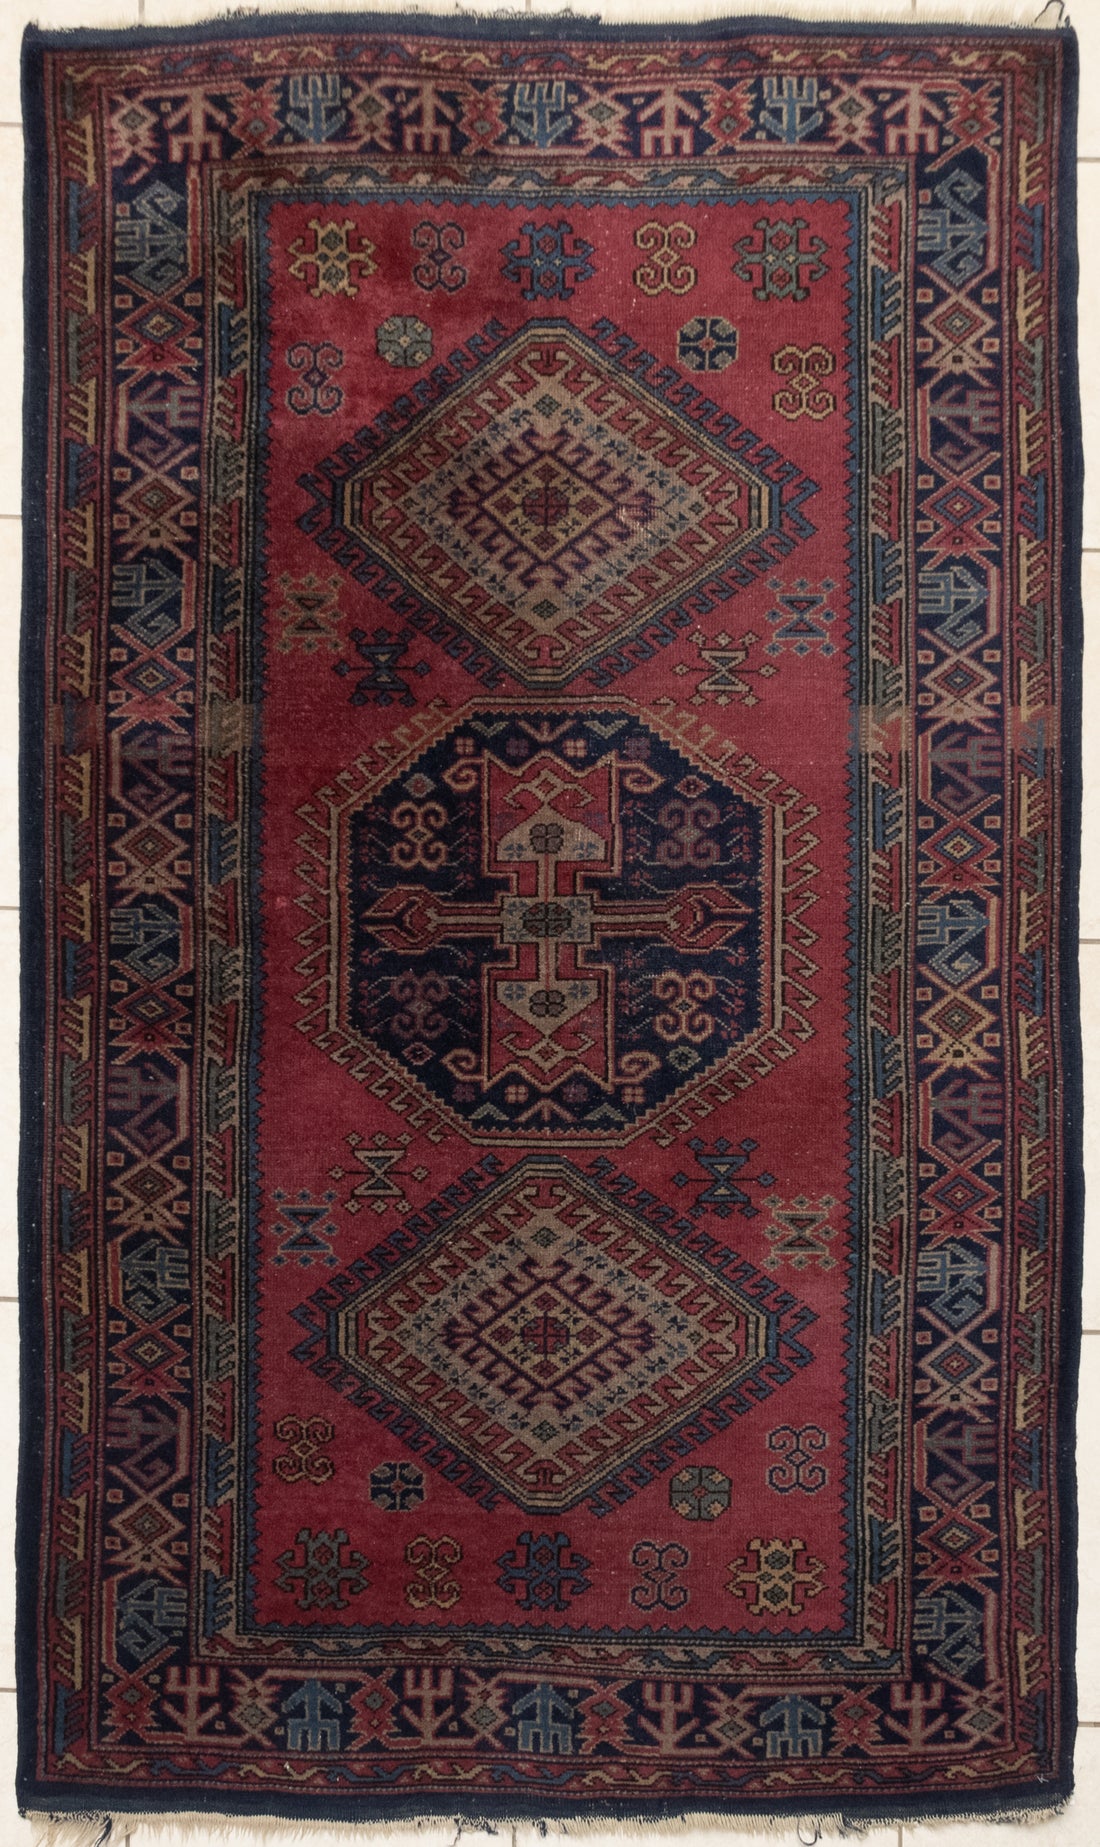 Hand-Knotted Wool Rug 6'9" x 4'1"